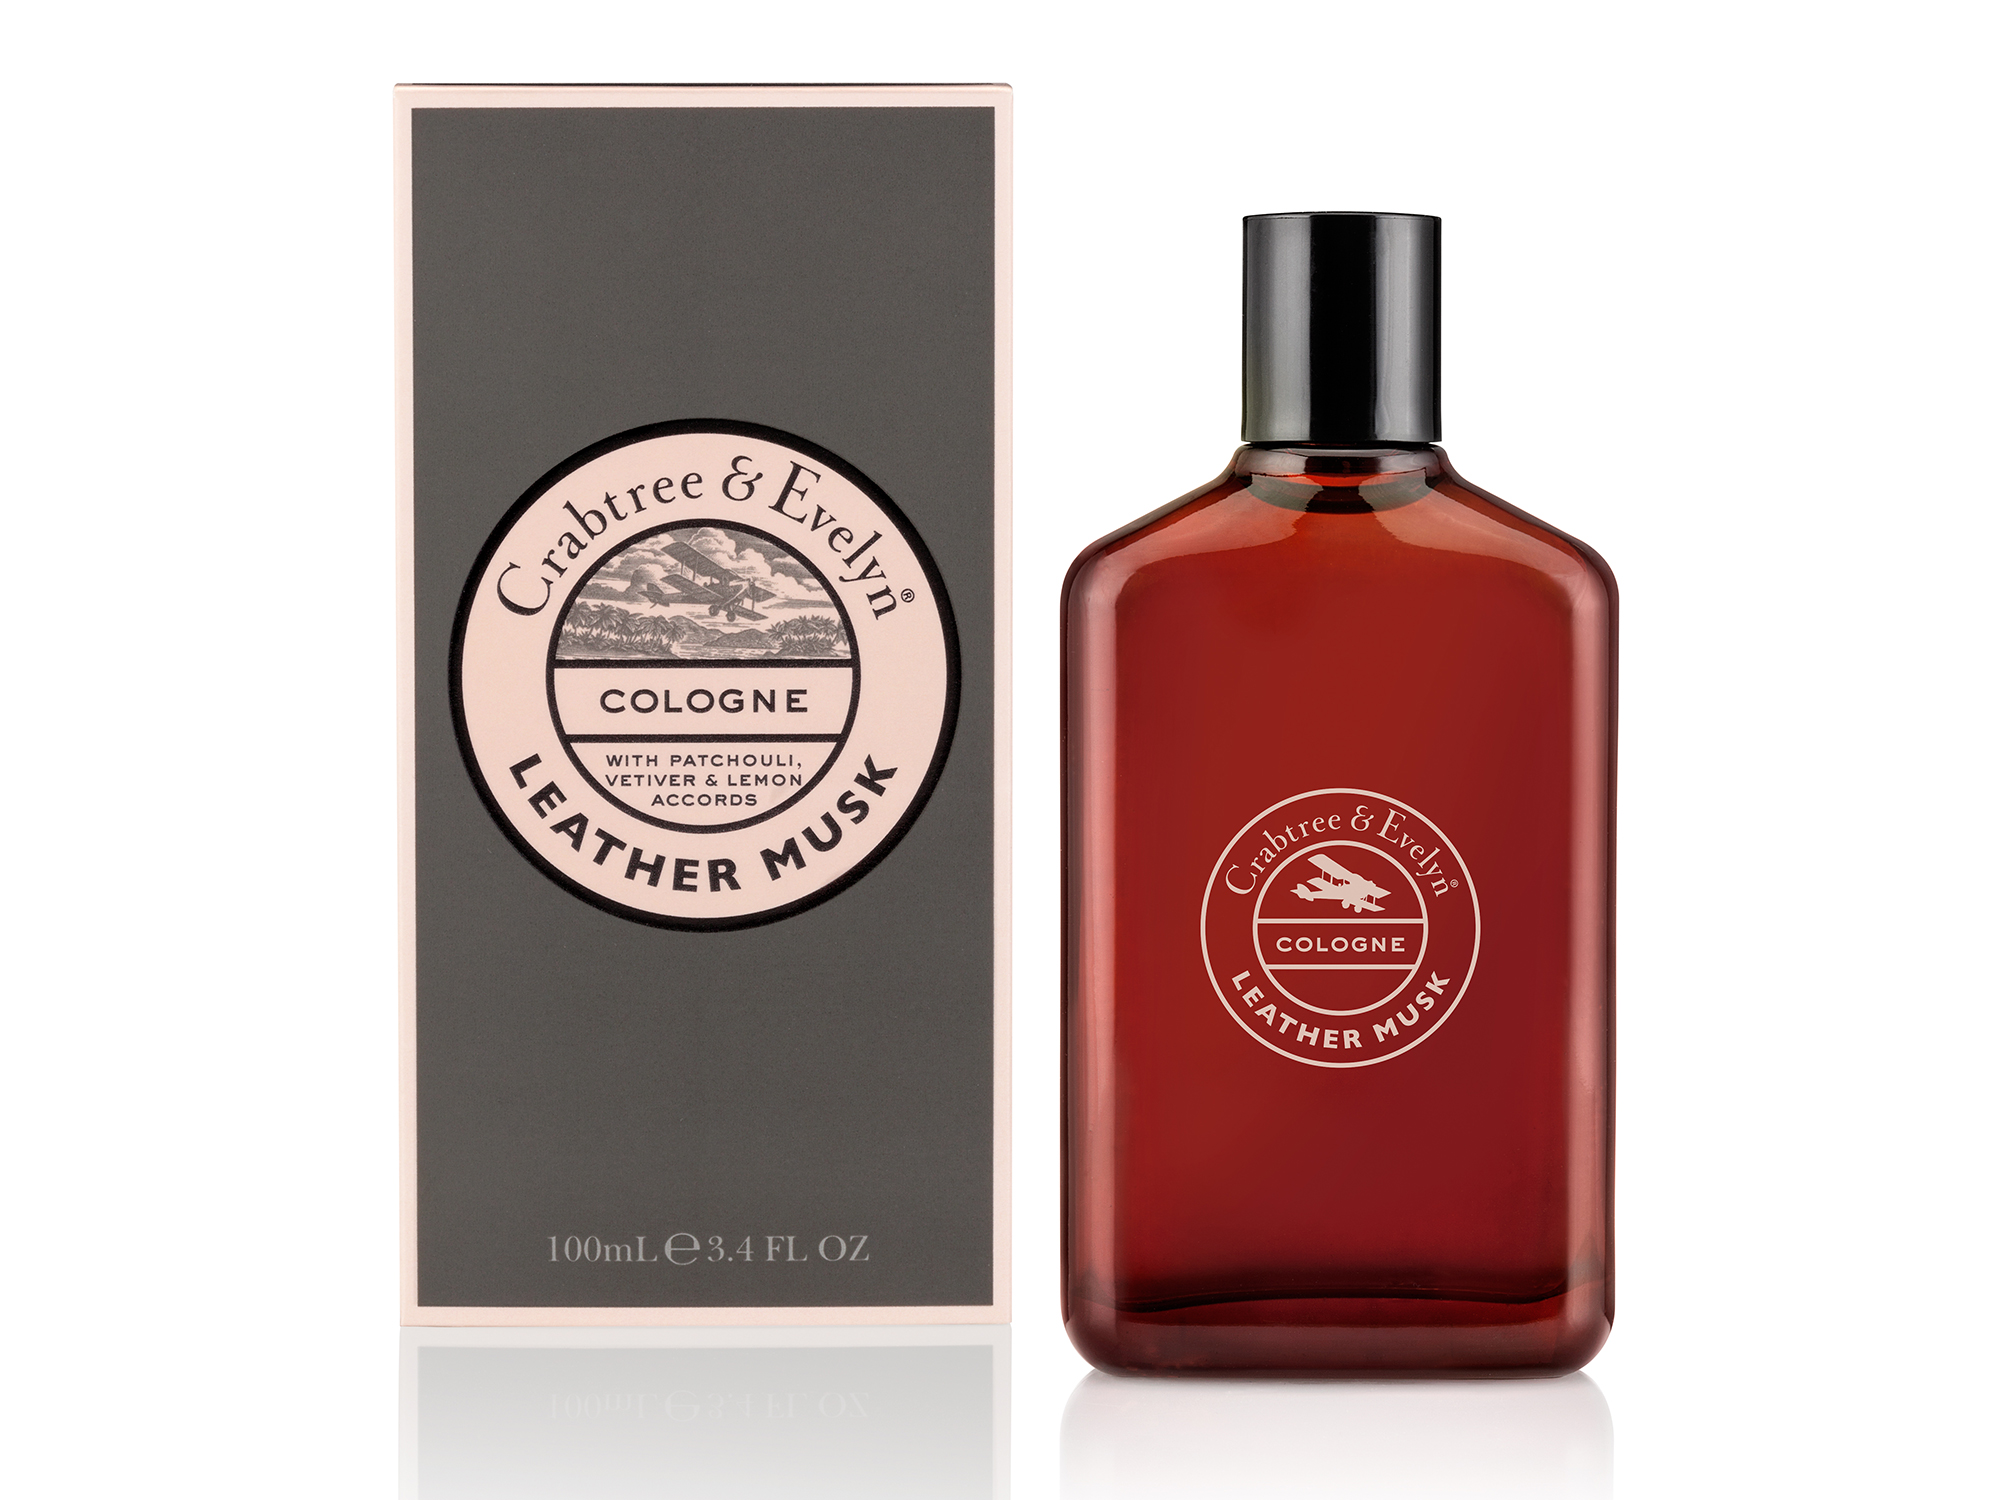 Leather-Musk-Cologne_bottle,-S$72.00